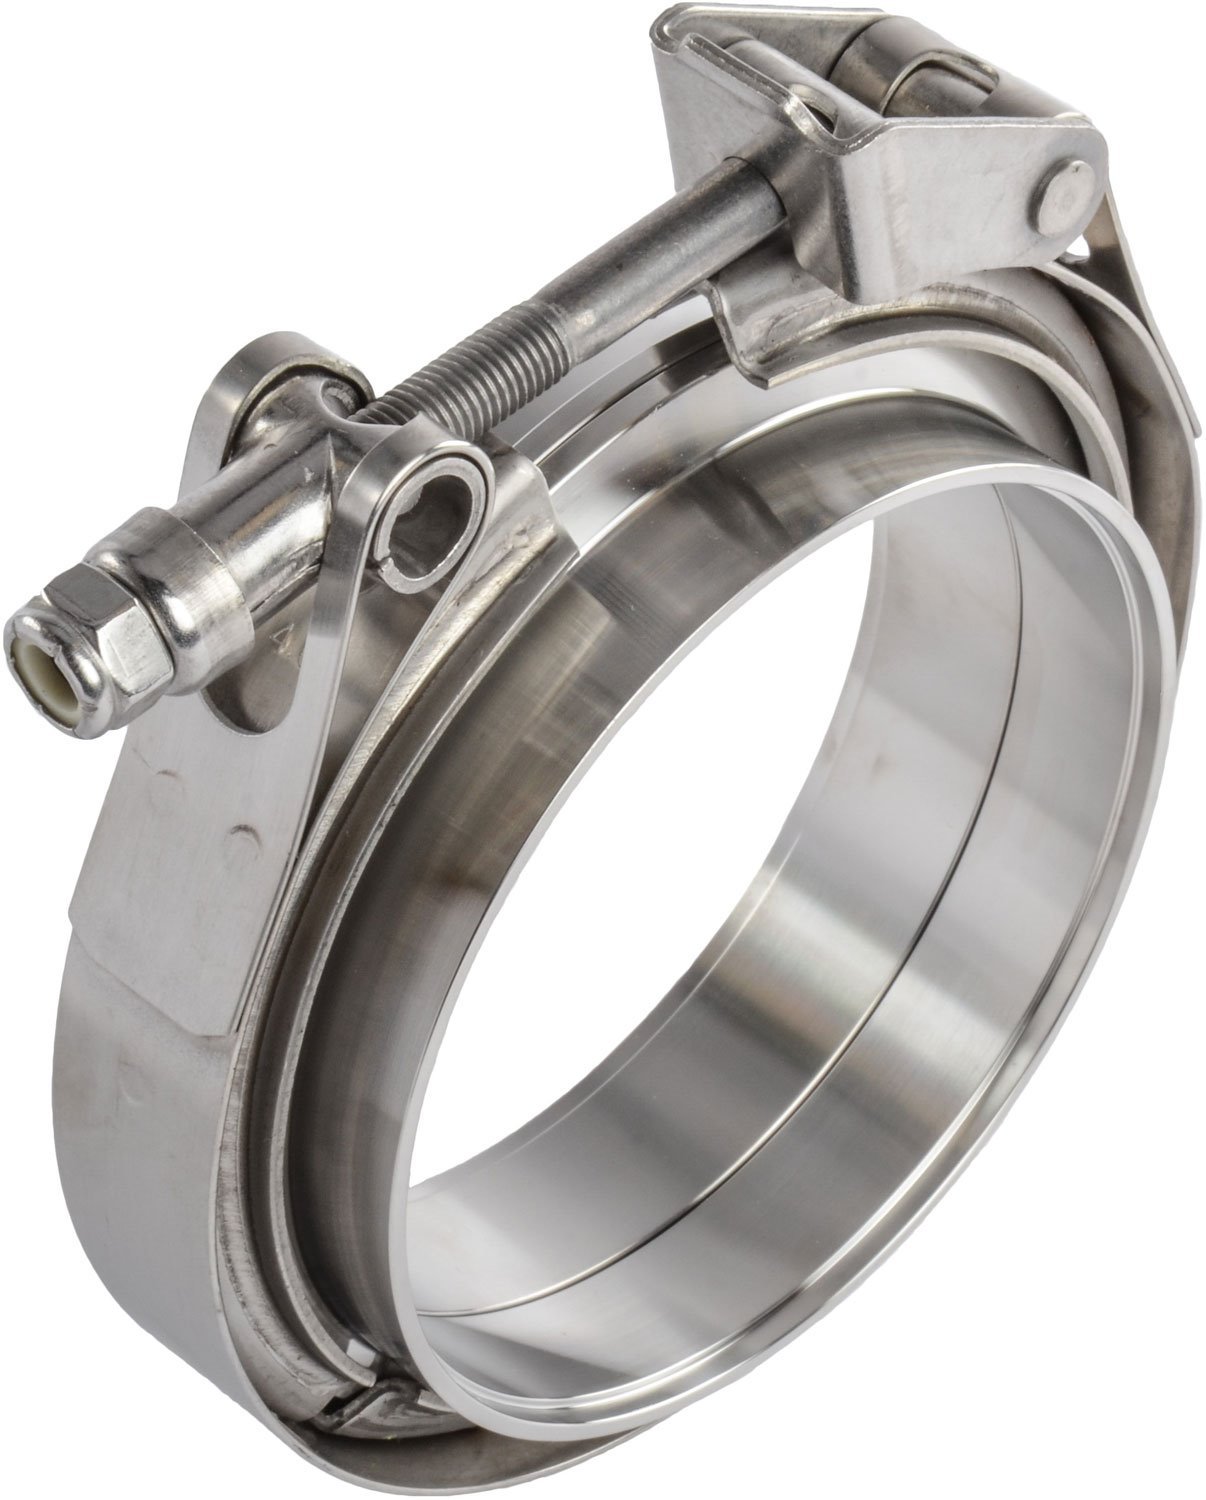 Stainless Steel Quick Release V-Band Clamp & Flanges 3 in.